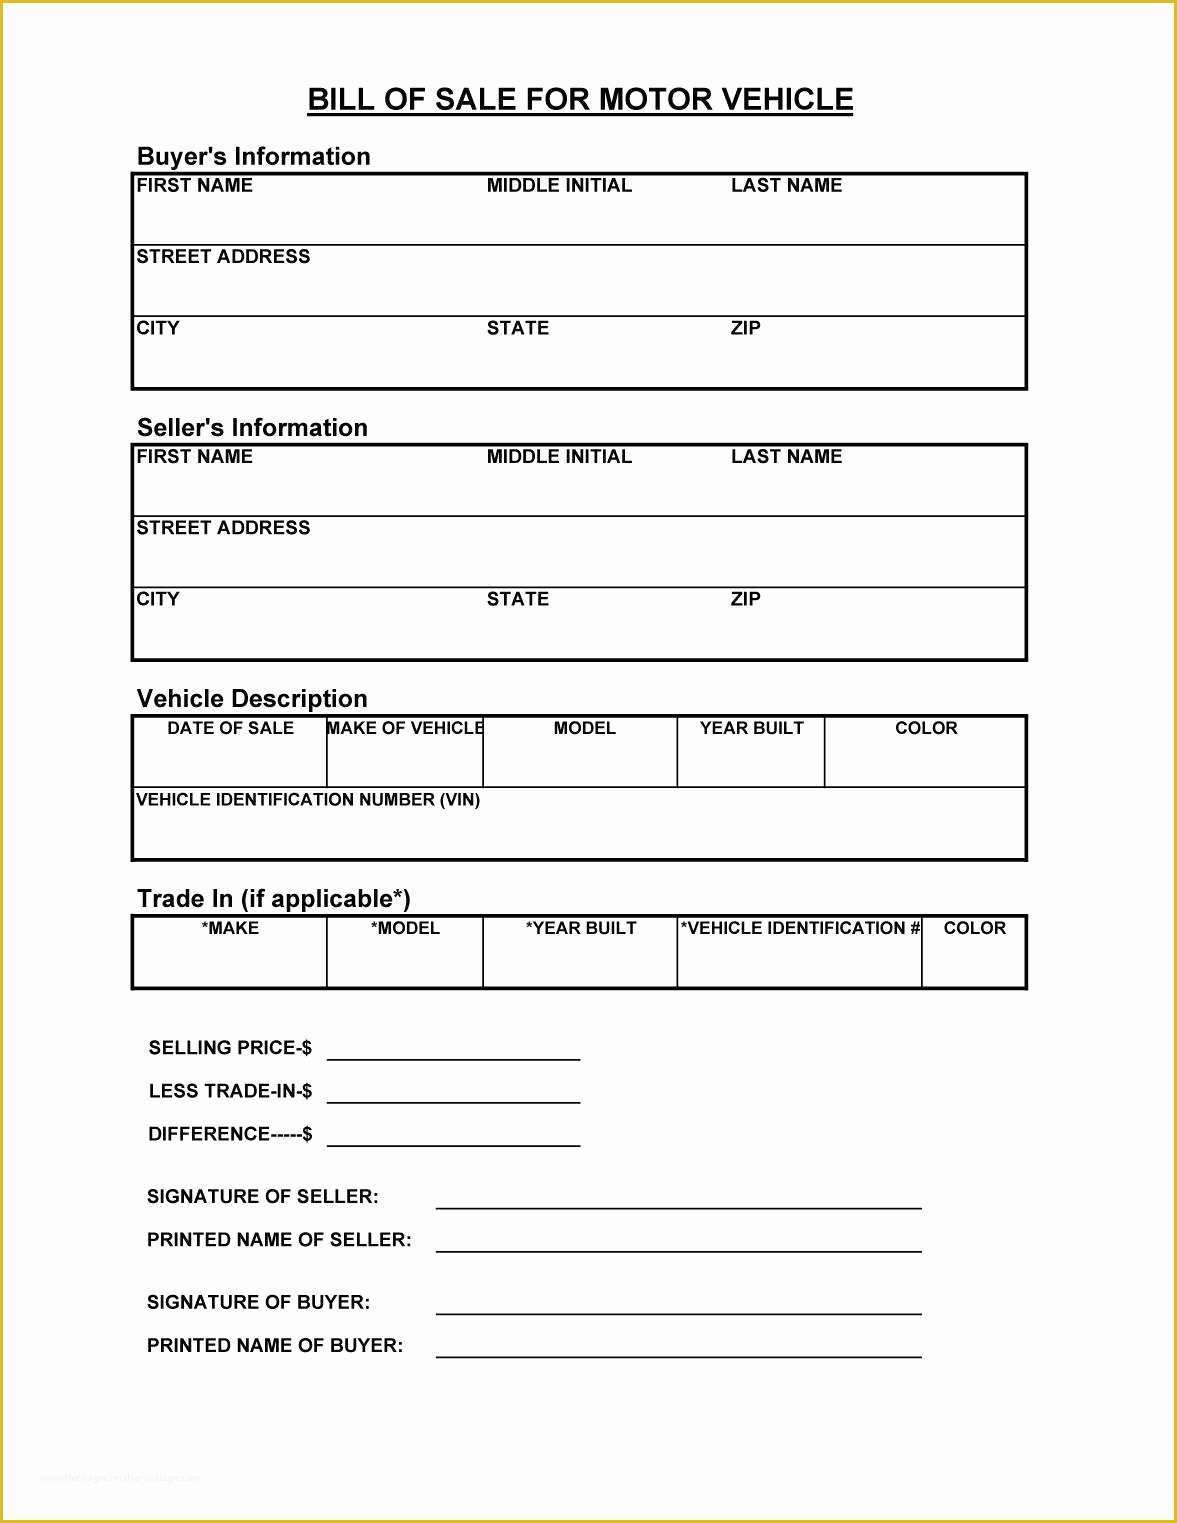 Free Bill Of Sale Template Of 45 Fee Printable Bill Of Sale Templates Car Boat Gun